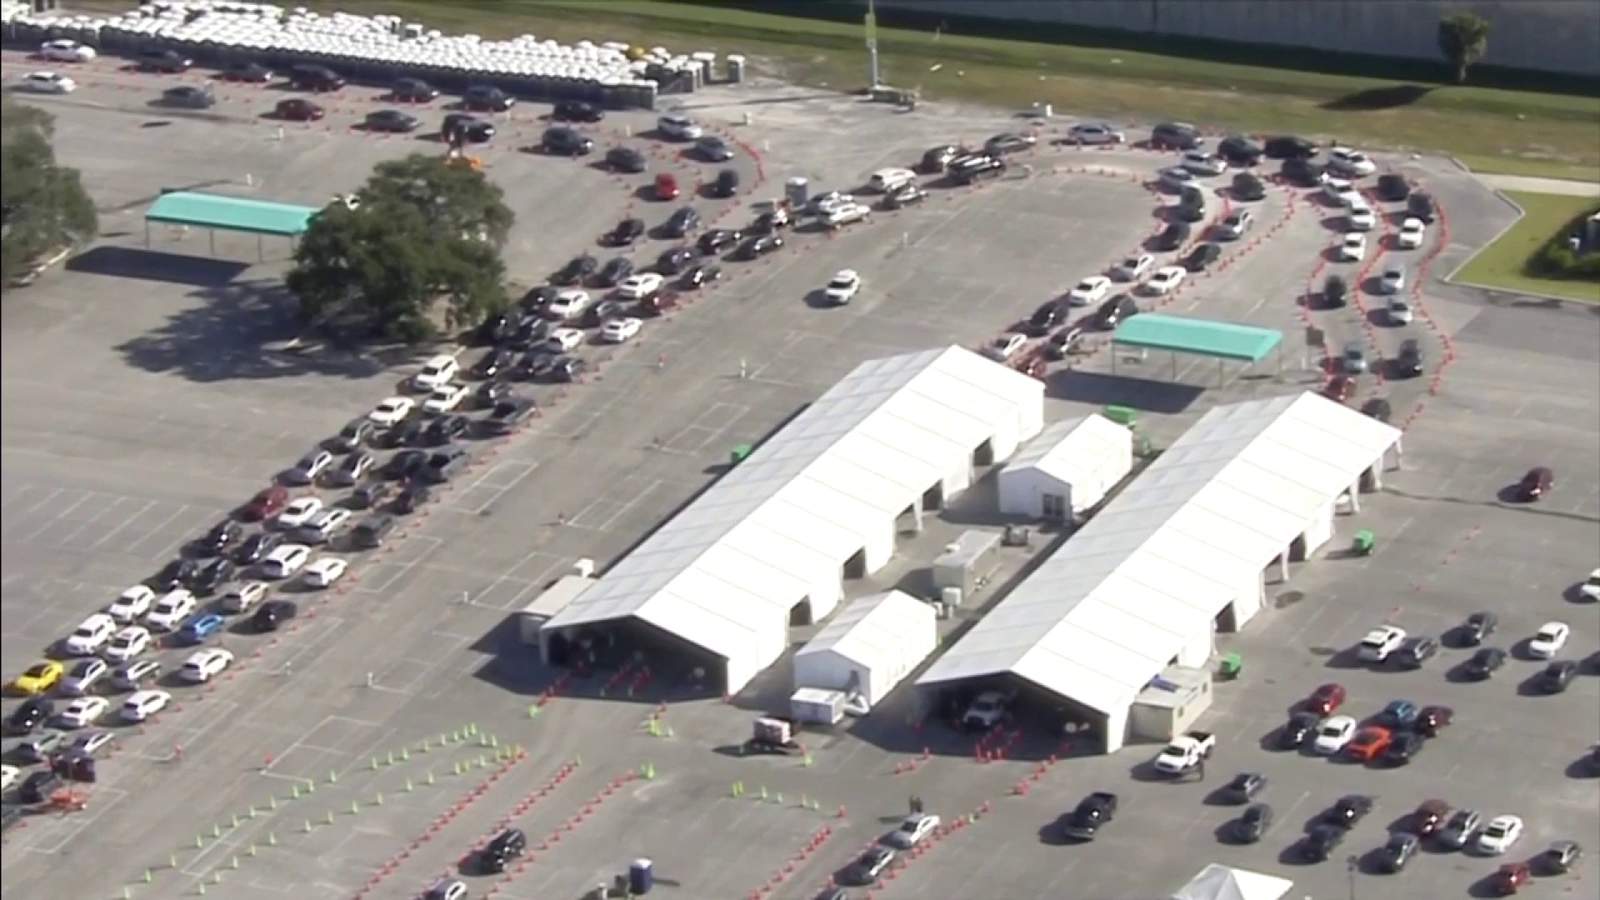 The Broward coronavirus test site has drivers in minutes;  drivers wait 3 hours in Miami-Dade